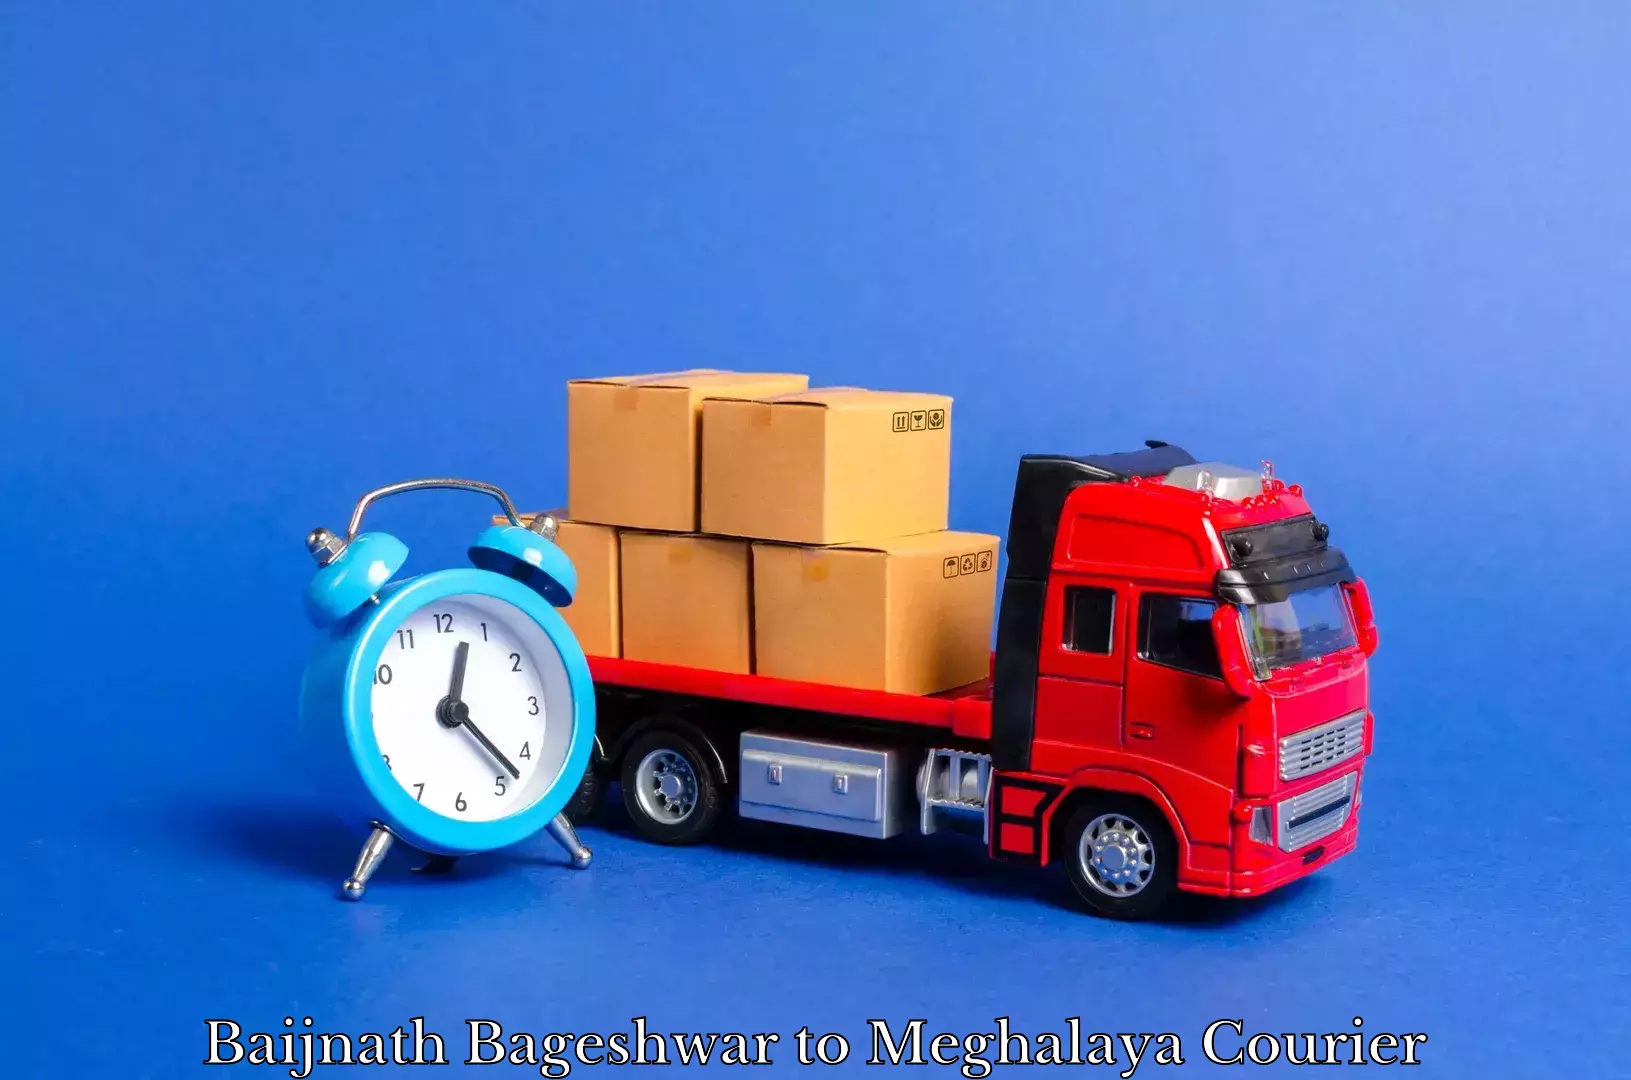 Professional movers and packers Baijnath Bageshwar to Shillong